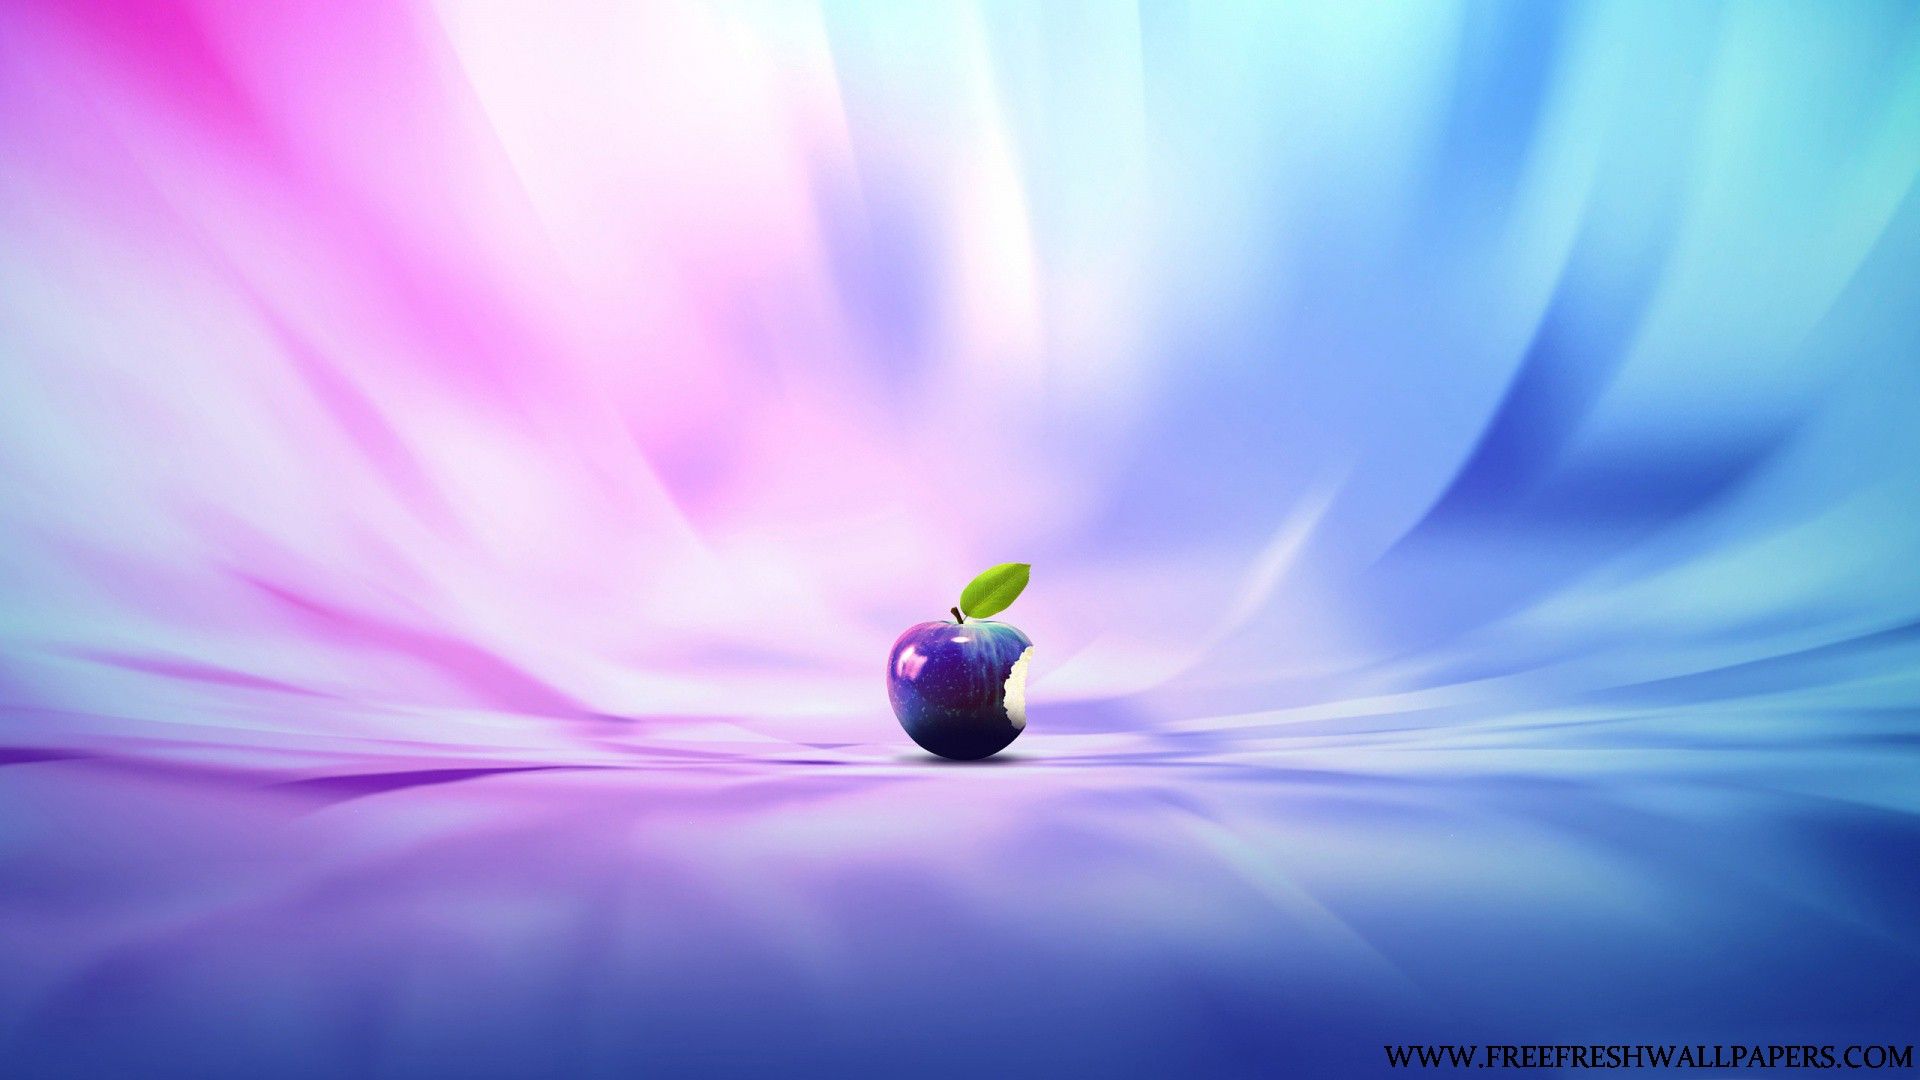 Cool apple hd wallpapers Daily pics update HD Wallpapers Download